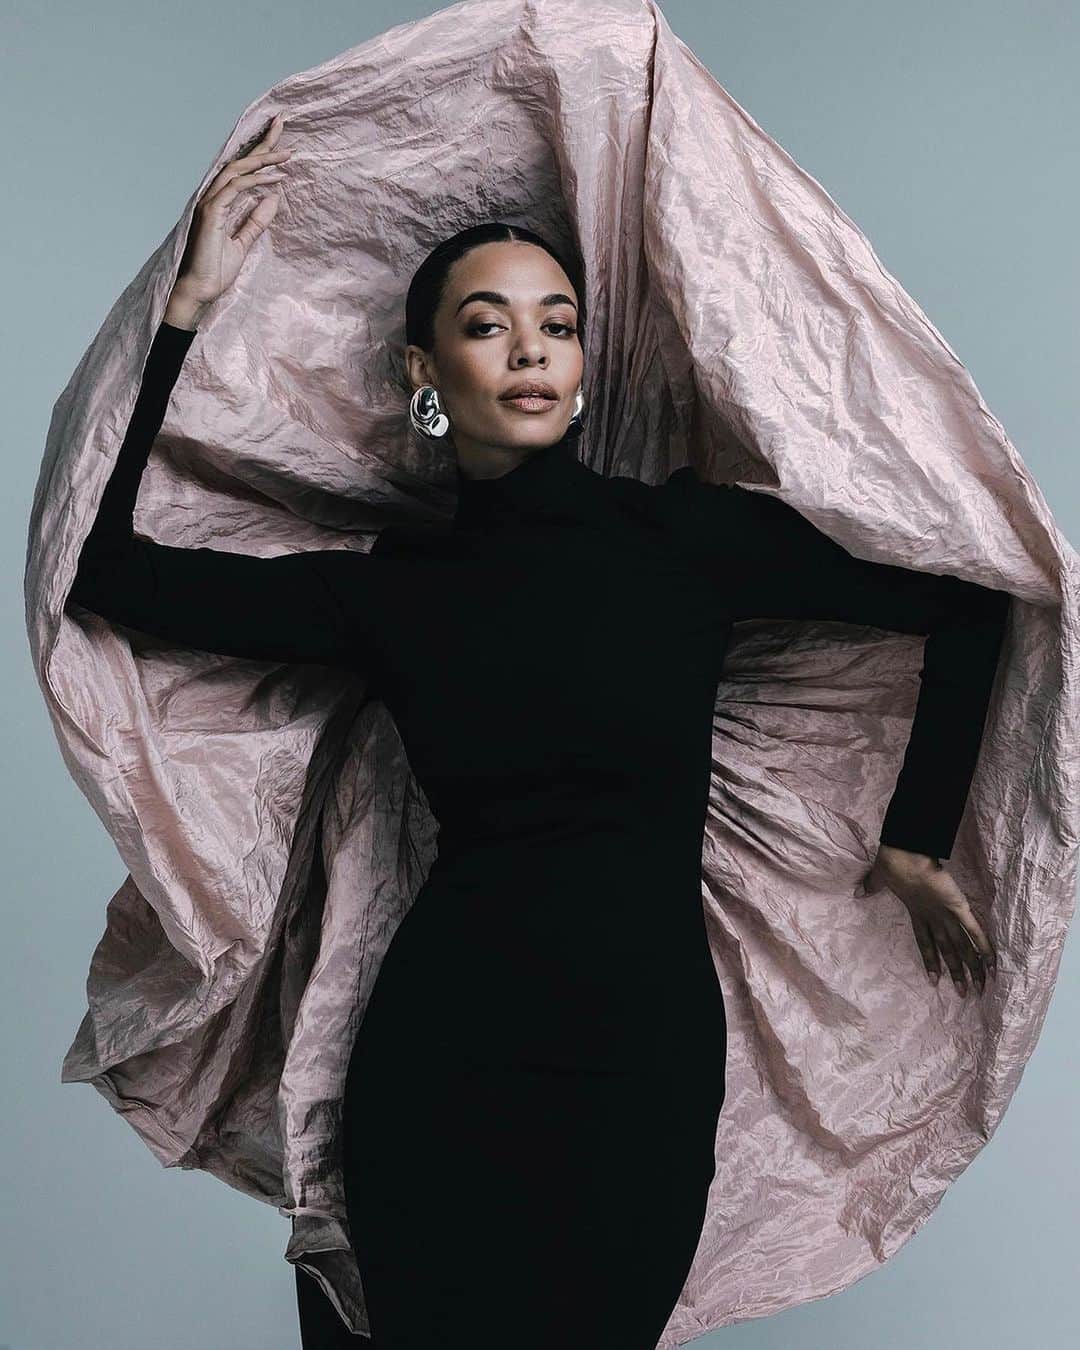 Monica Sordoのインスタグラム：「Designer, activist, entrepreneur and writer of her memoir “Wildflower” @aurorajames is taking agency of her story and rewriting the rules of Black woman in bussines.  ~  As seen on the pages of @vmagazine ‘s  V142 summer issue wearing the Cubagua Earrings and @atelierbiser gown styled by @aisharaestyle and portrayed by @enfoque_lumiere  - Link in bio for the full Inspiring story and her foray into literature by @bethannhardison」